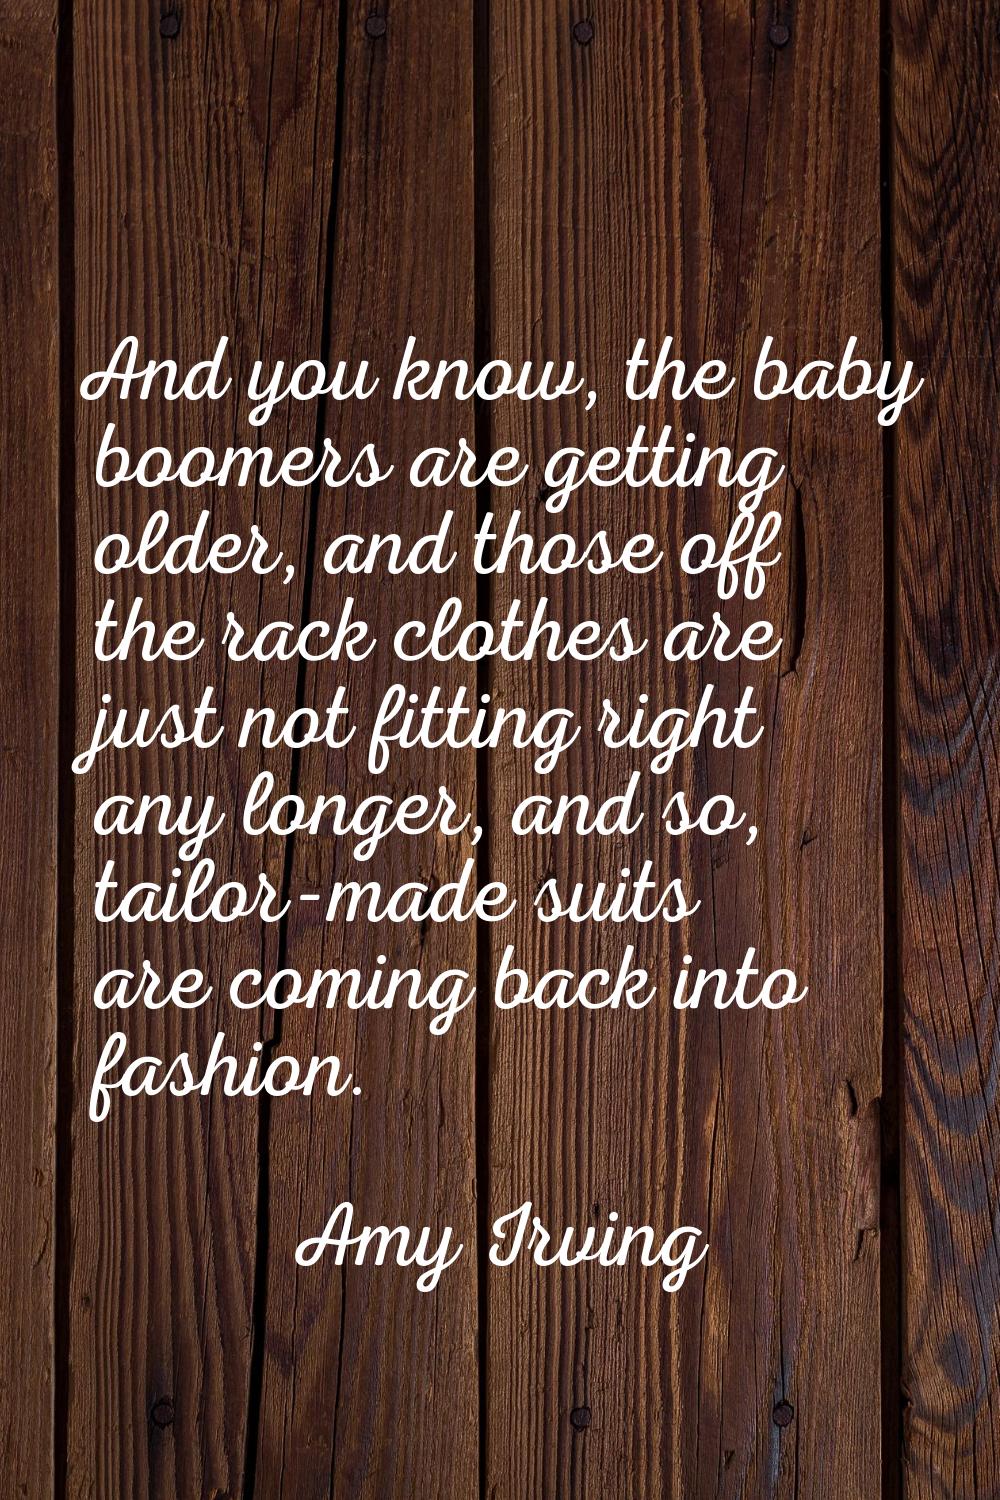 And you know, the baby boomers are getting older, and those off the rack clothes are just not fitti